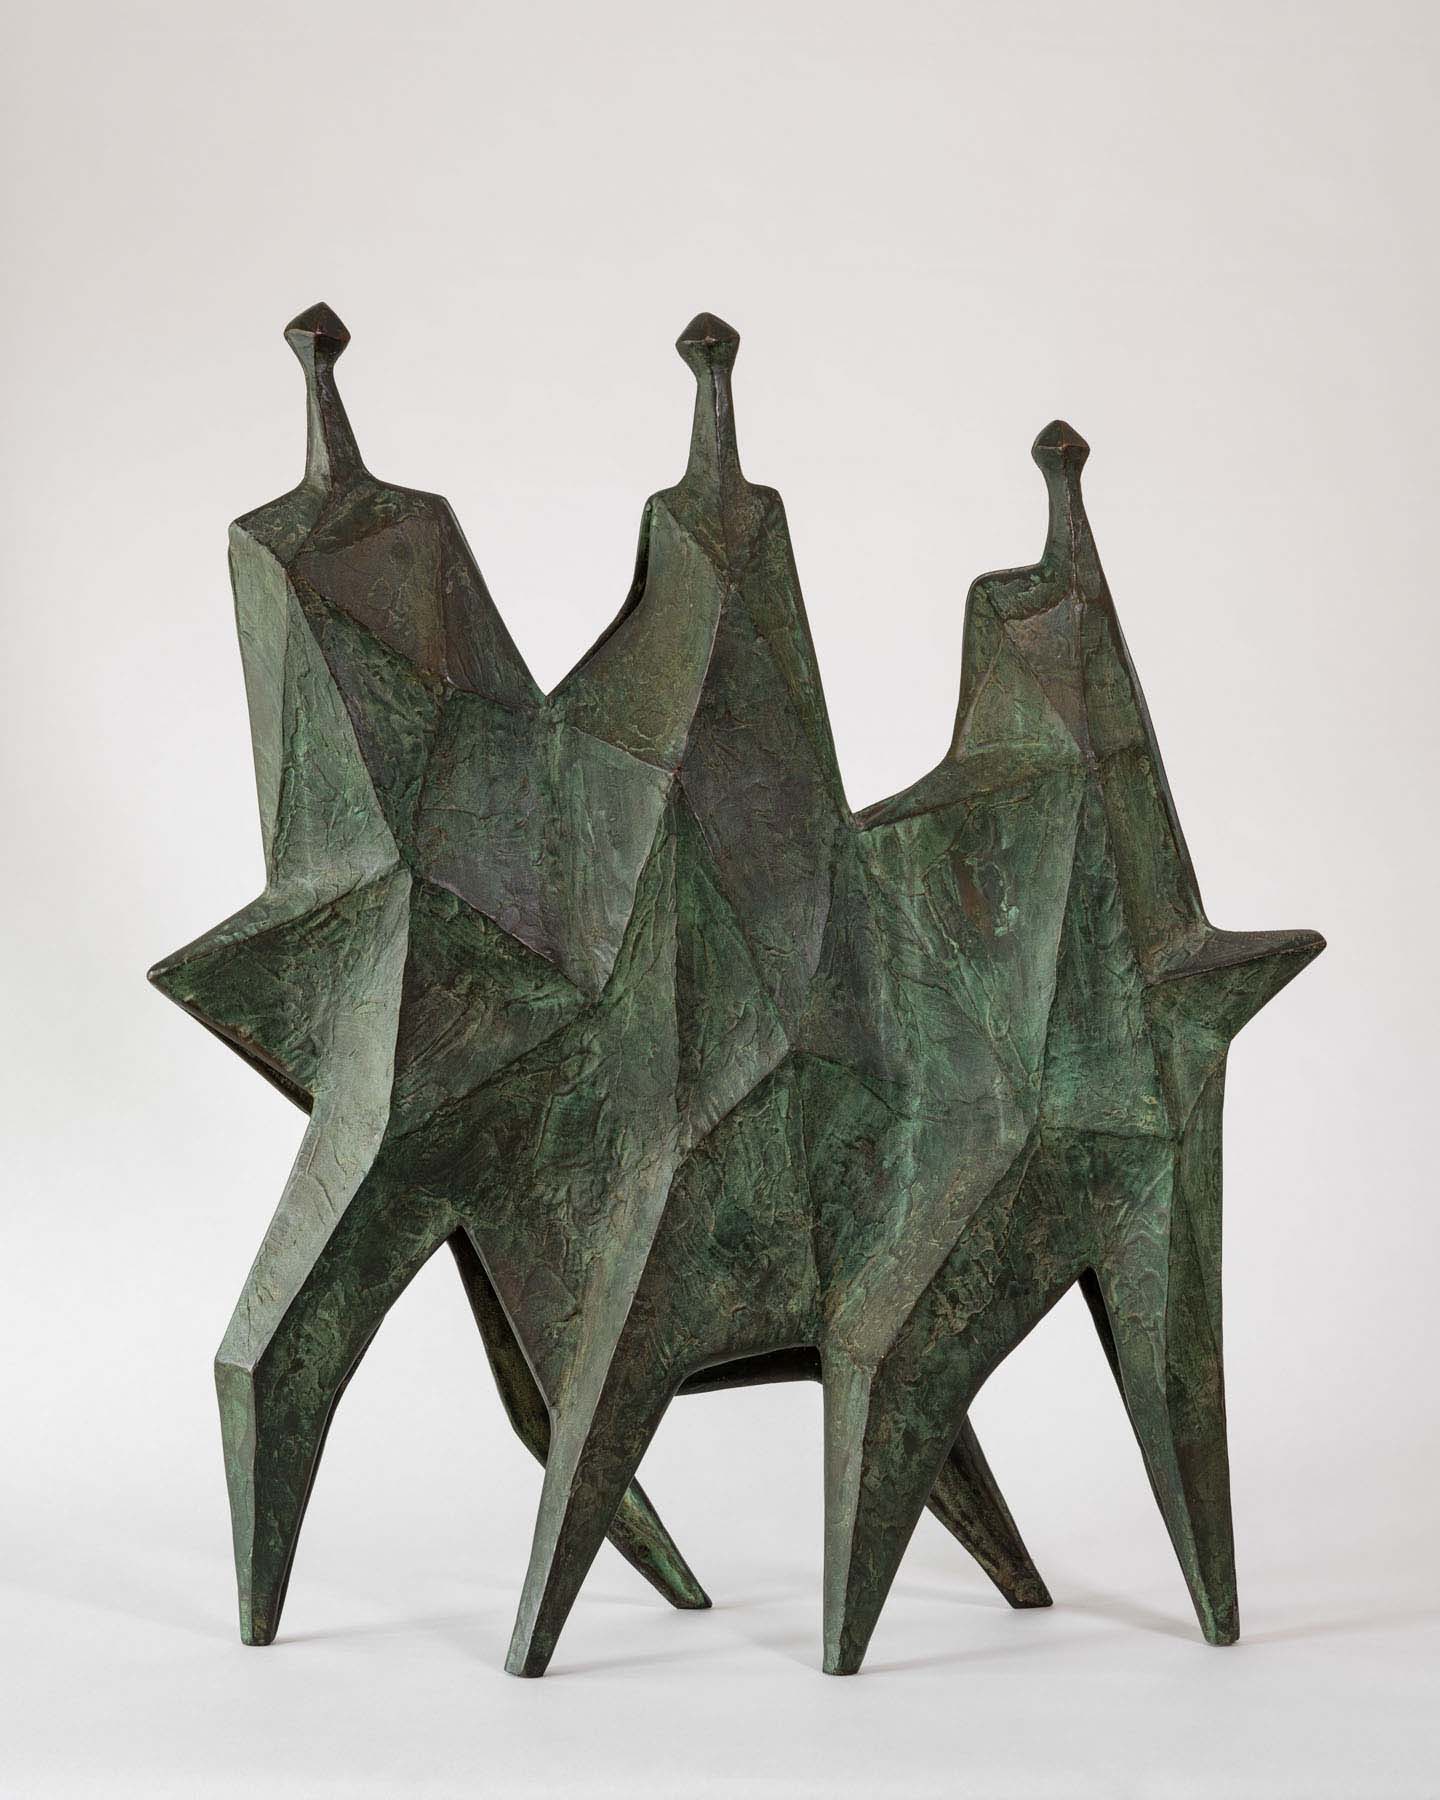 Bronze sculpture of three human-like geometric figures that are attached in the center.